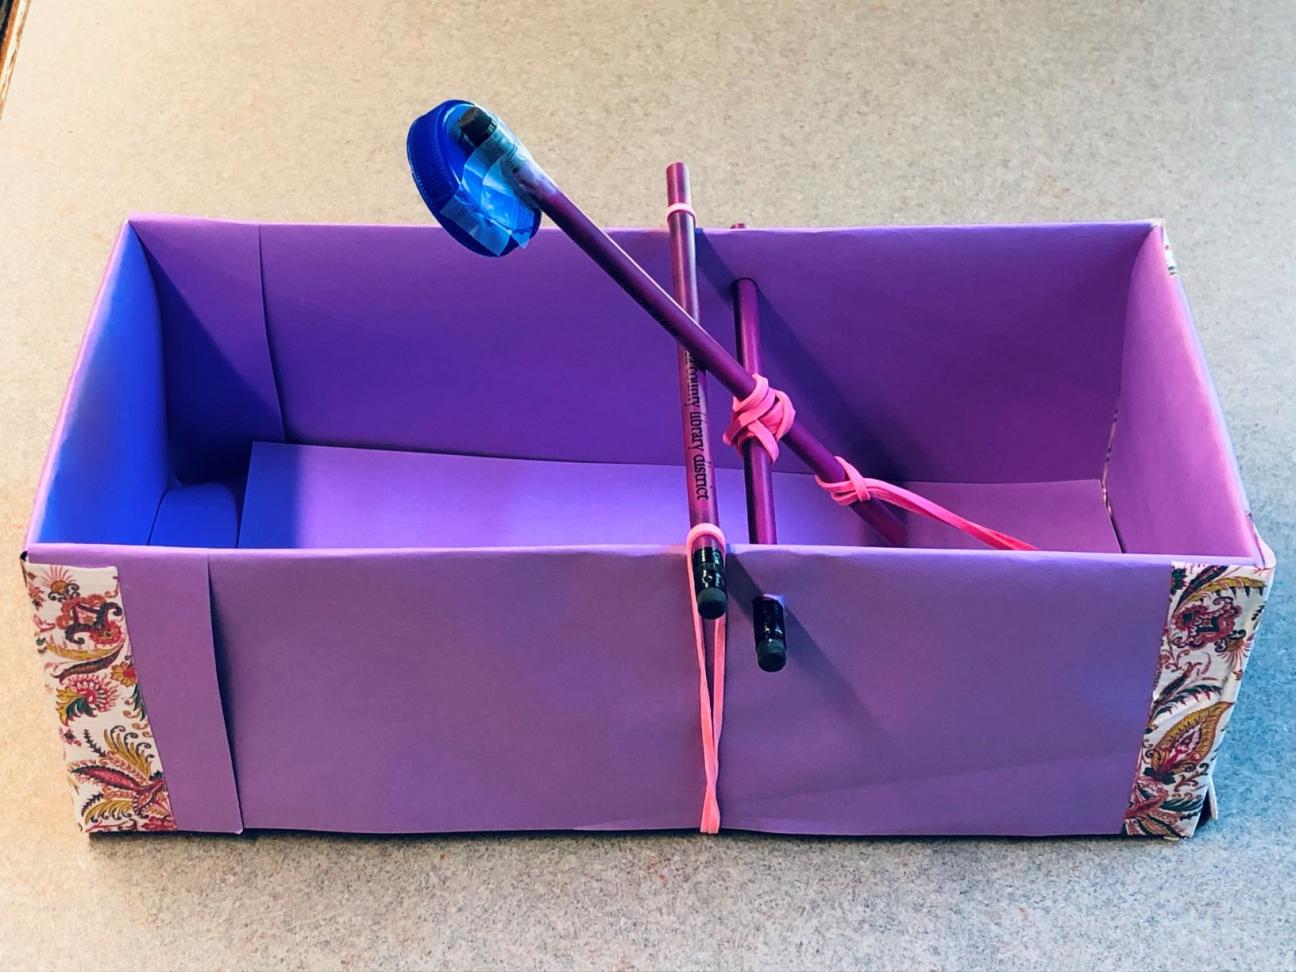 Completed shoe box catapult